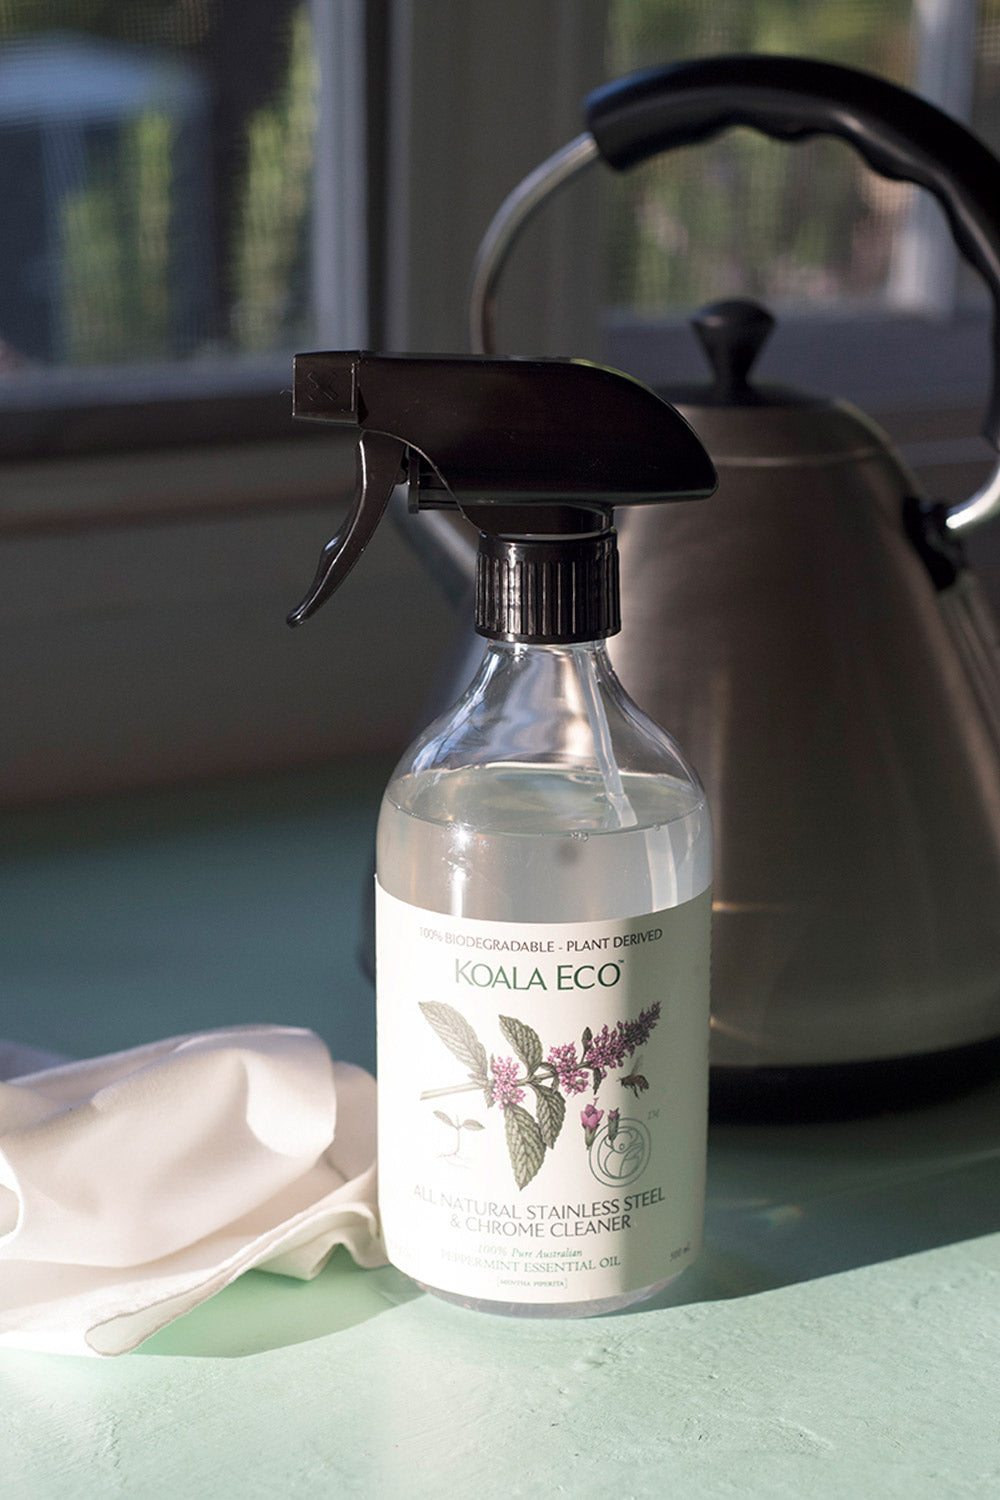 Testing the all natural stainless steel and chrome cleaner in our Love Mae designers kitchen